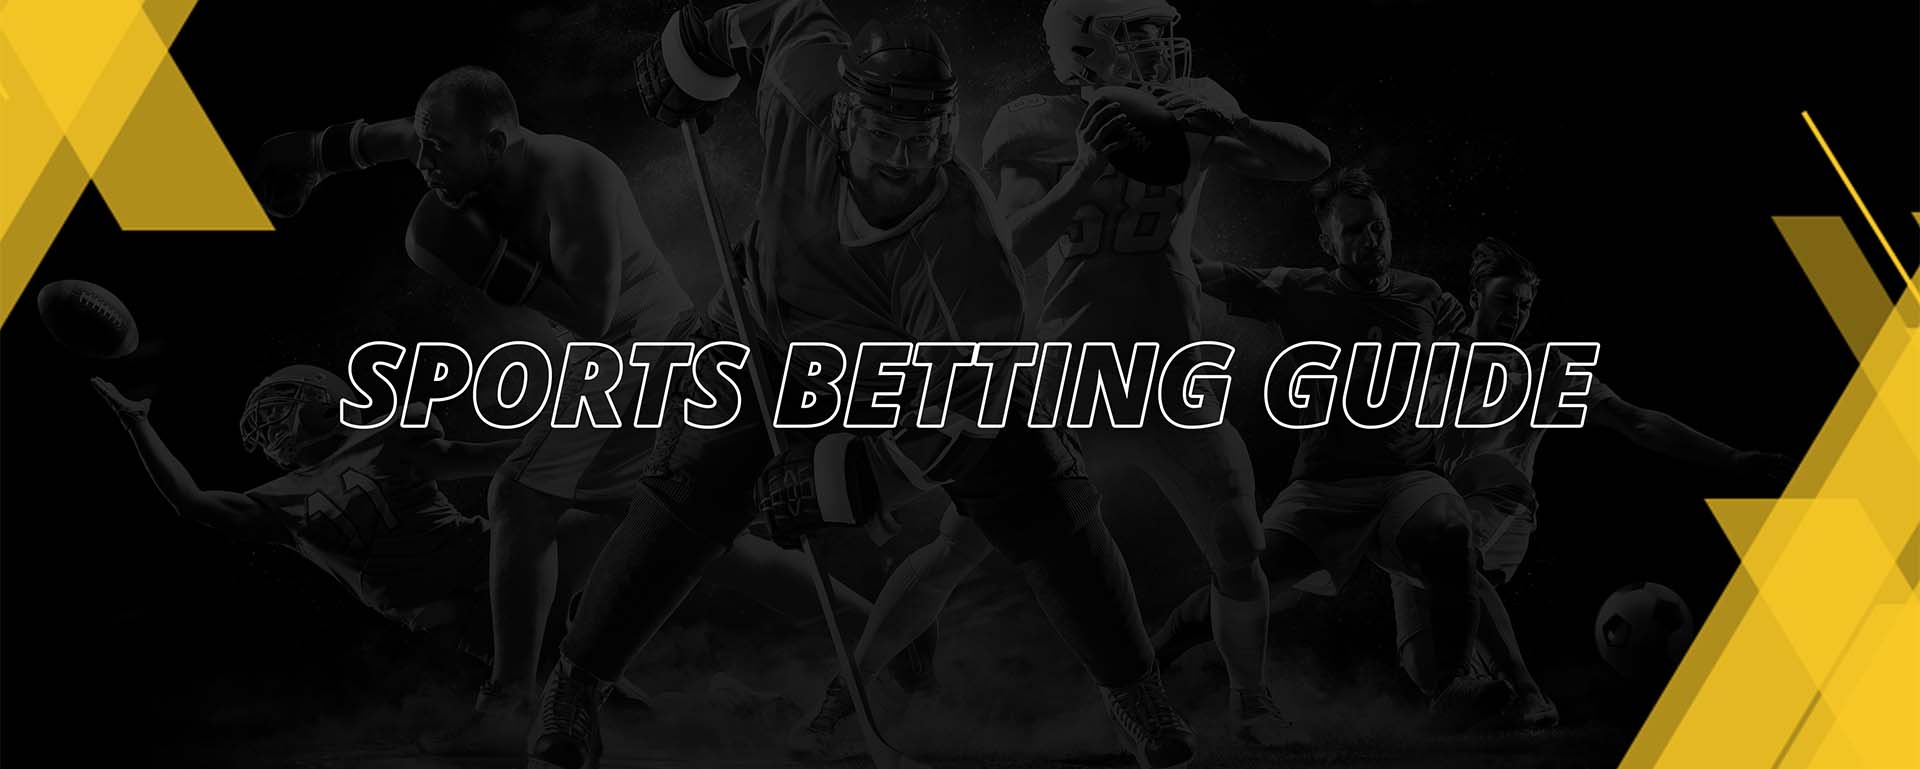 SPORTS BETTING GUIDE